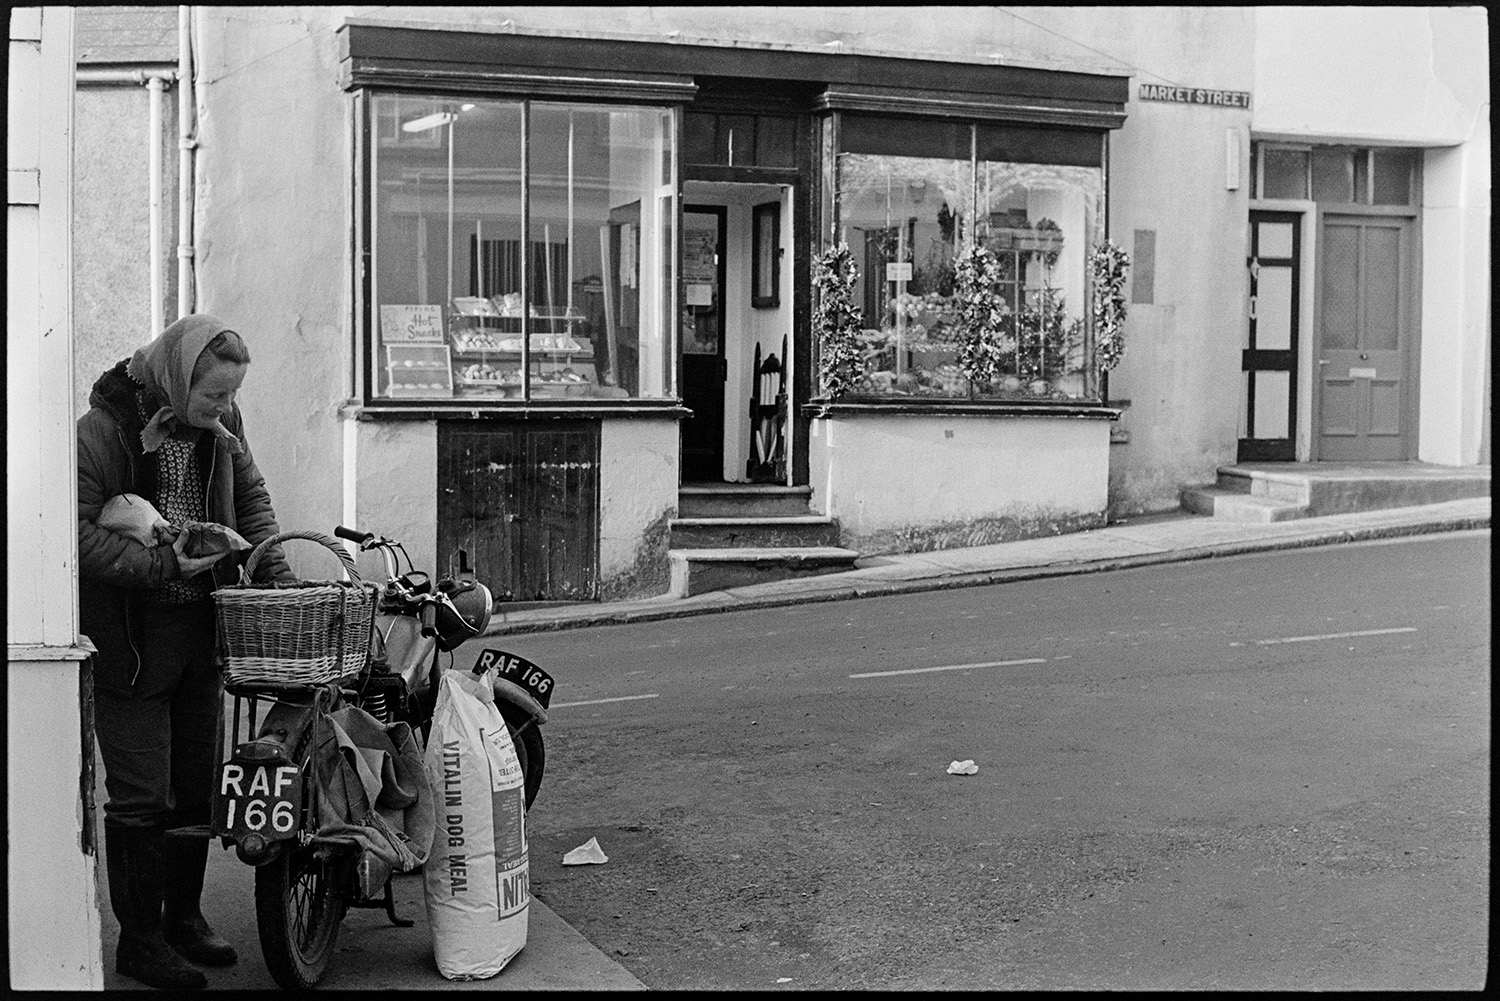 Woman motorcyclist in front of shop, street scenes with woman in telephone kiosk. 
[A woman putting groceries into a basket on a motorbike, parked opposite a shop front on Market Street in Hatherleigh. A bag of dog food is next to the motorbike.]